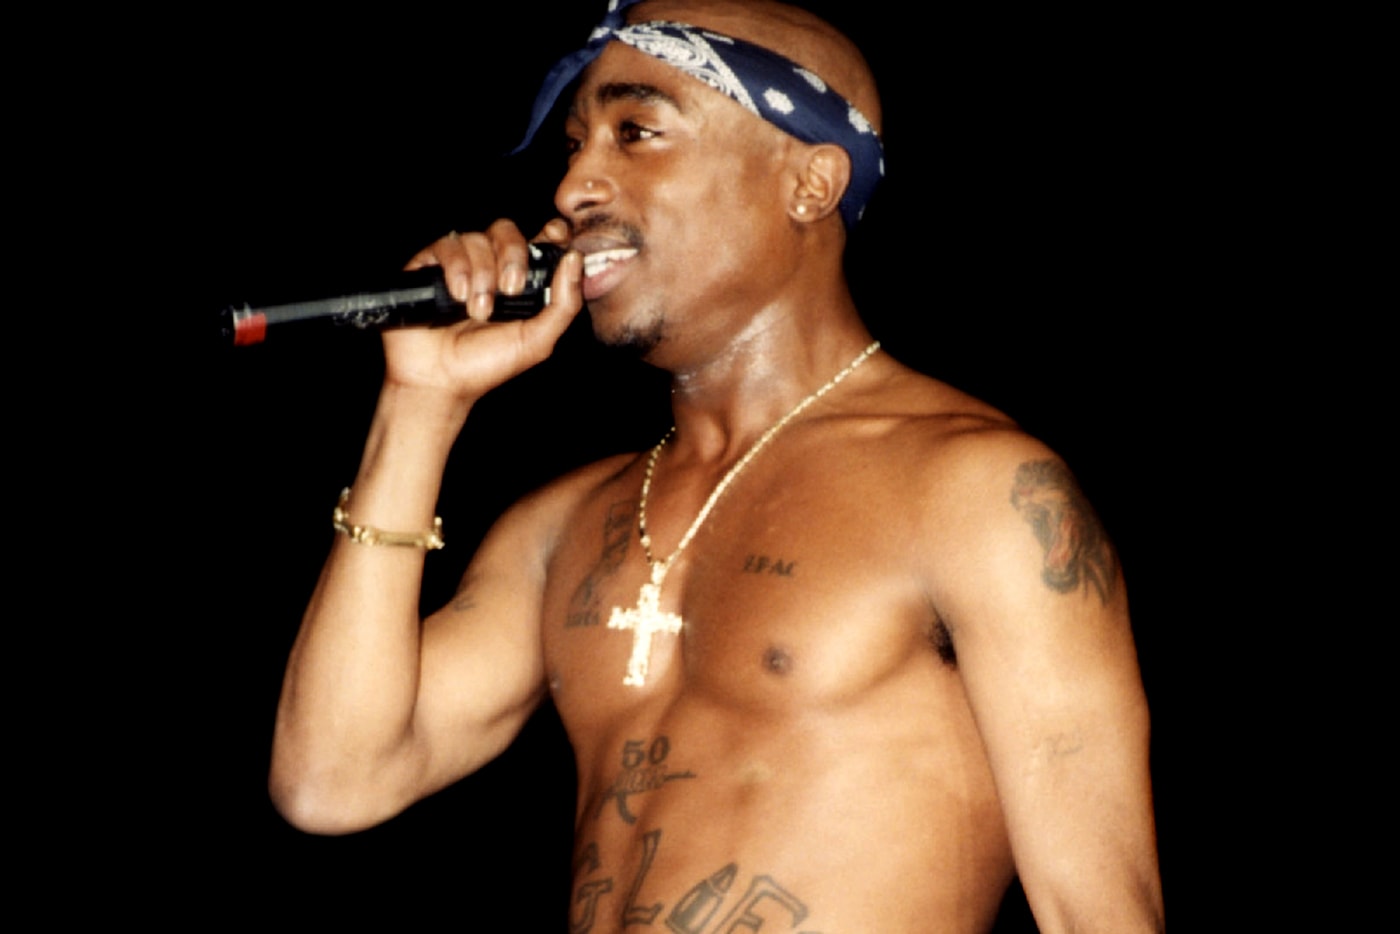 Tupac Handwritten Notebooks and Unreleased CDs Are Going up for Auction